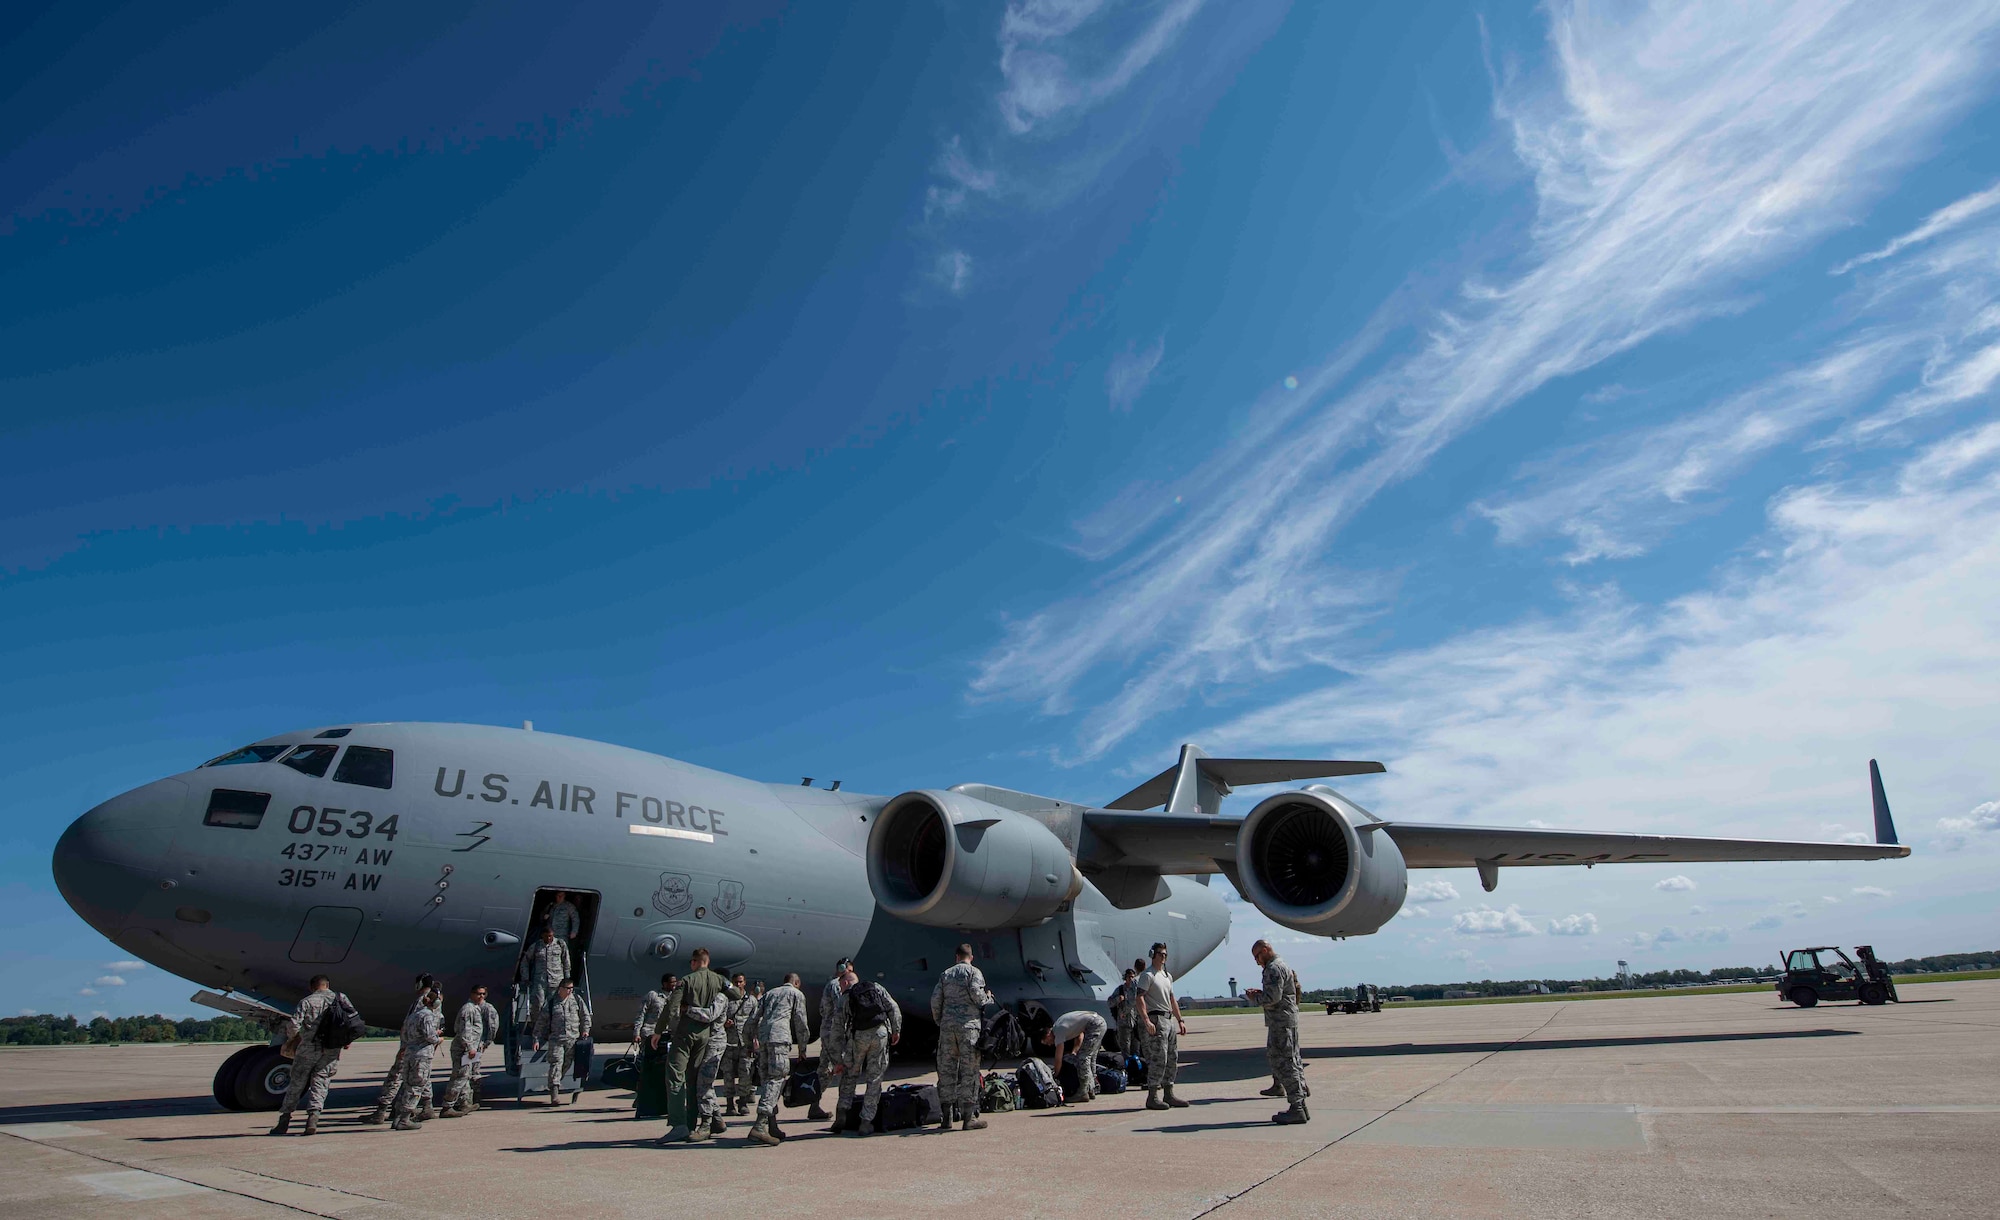 Airmen from Joint Base Charleston disembark a C-17 Globemaster III, Sept. 11, 2018, at Scott AFB, Illinois. Scott AFB teamed up with Mid-America Airport to host a fleet of C-17s assigned to the 437th Airlift Wing during Hurricane Florence evacuation efforts. (U.S. Air Force photo by Airman 1st Class Tara Stetler)